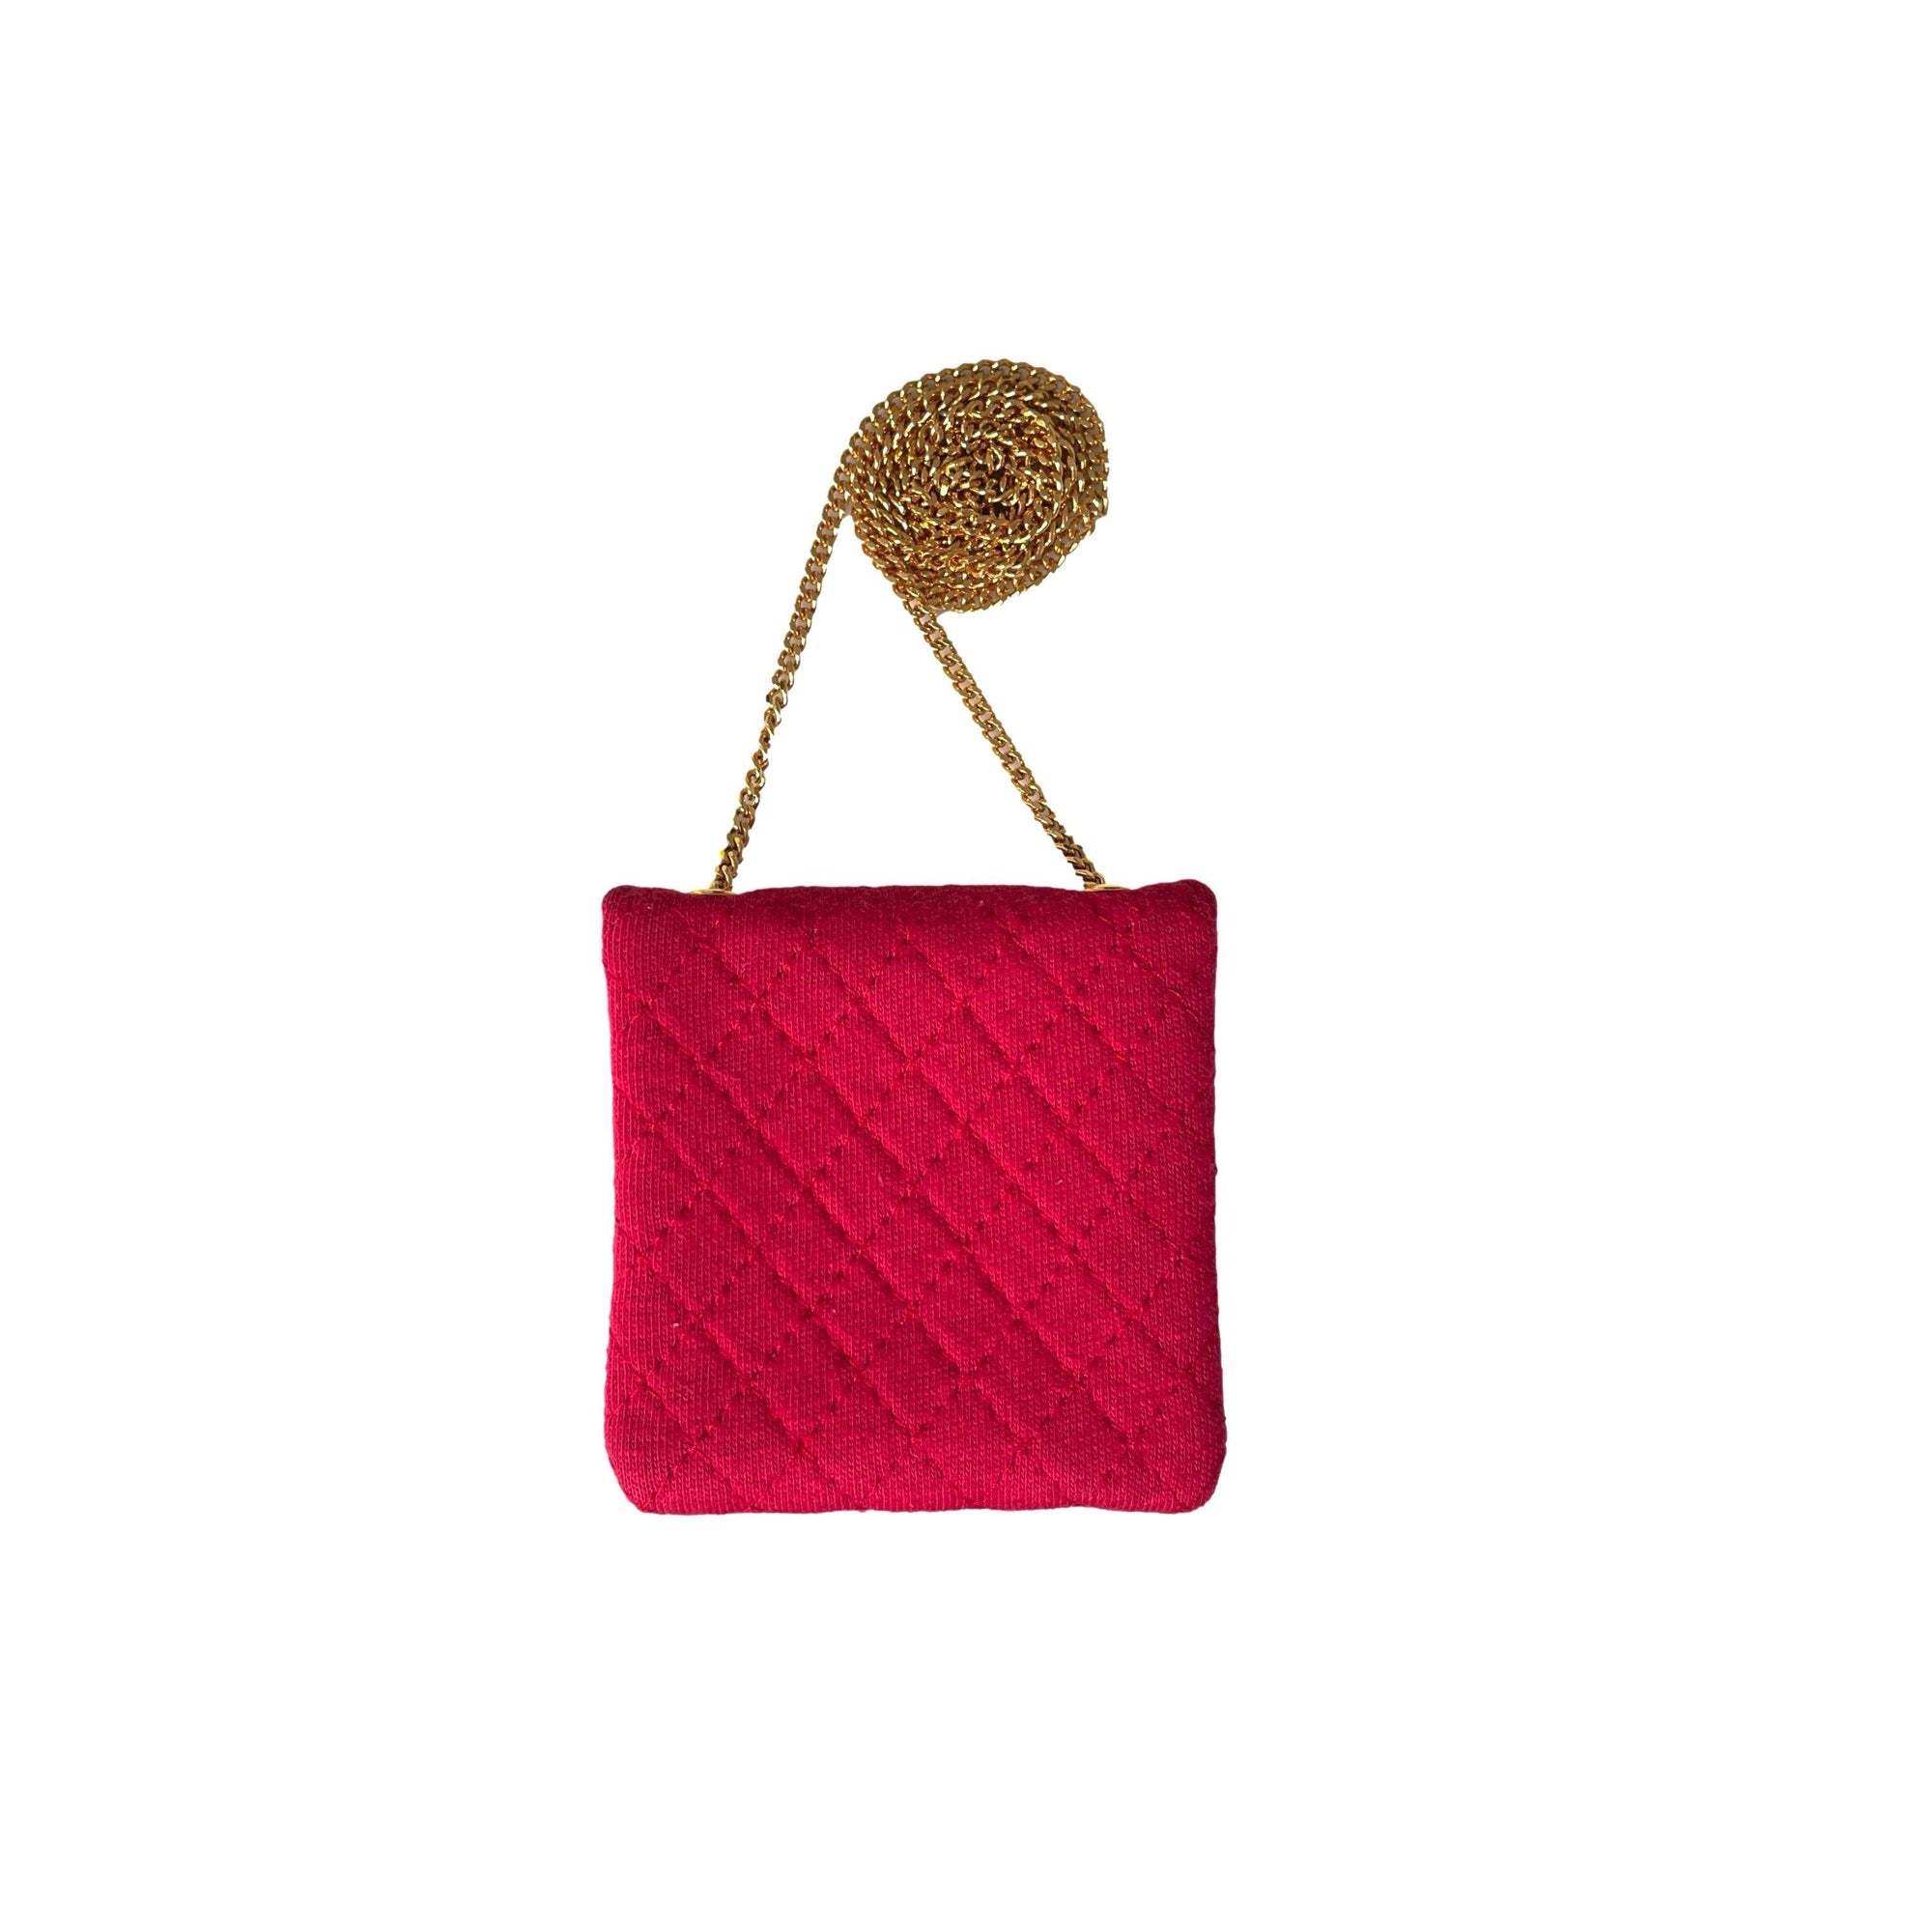 Chanel Fuchsia Quilted Micro Bag - Accessories